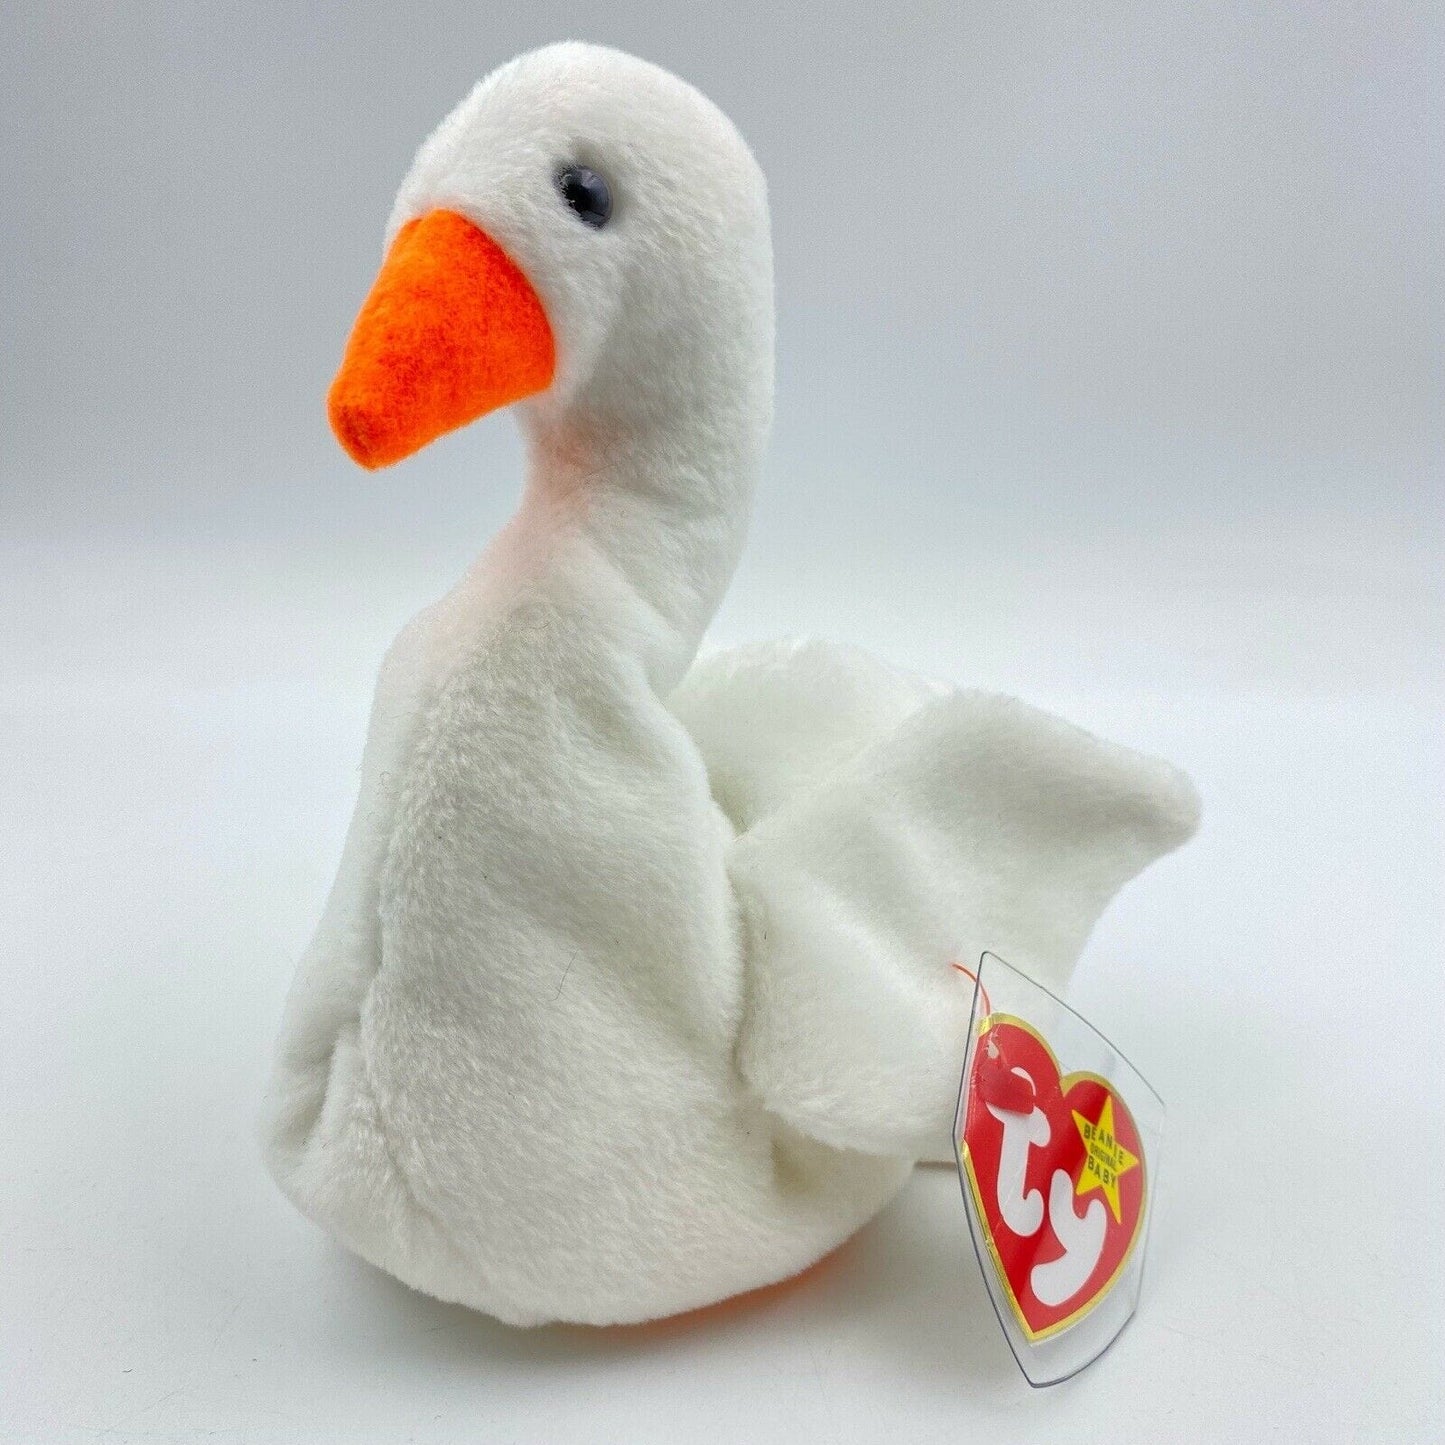 Ty Original Beanie Babies “Gracie” The Swan 1996 MINT Condition - Tag Errors